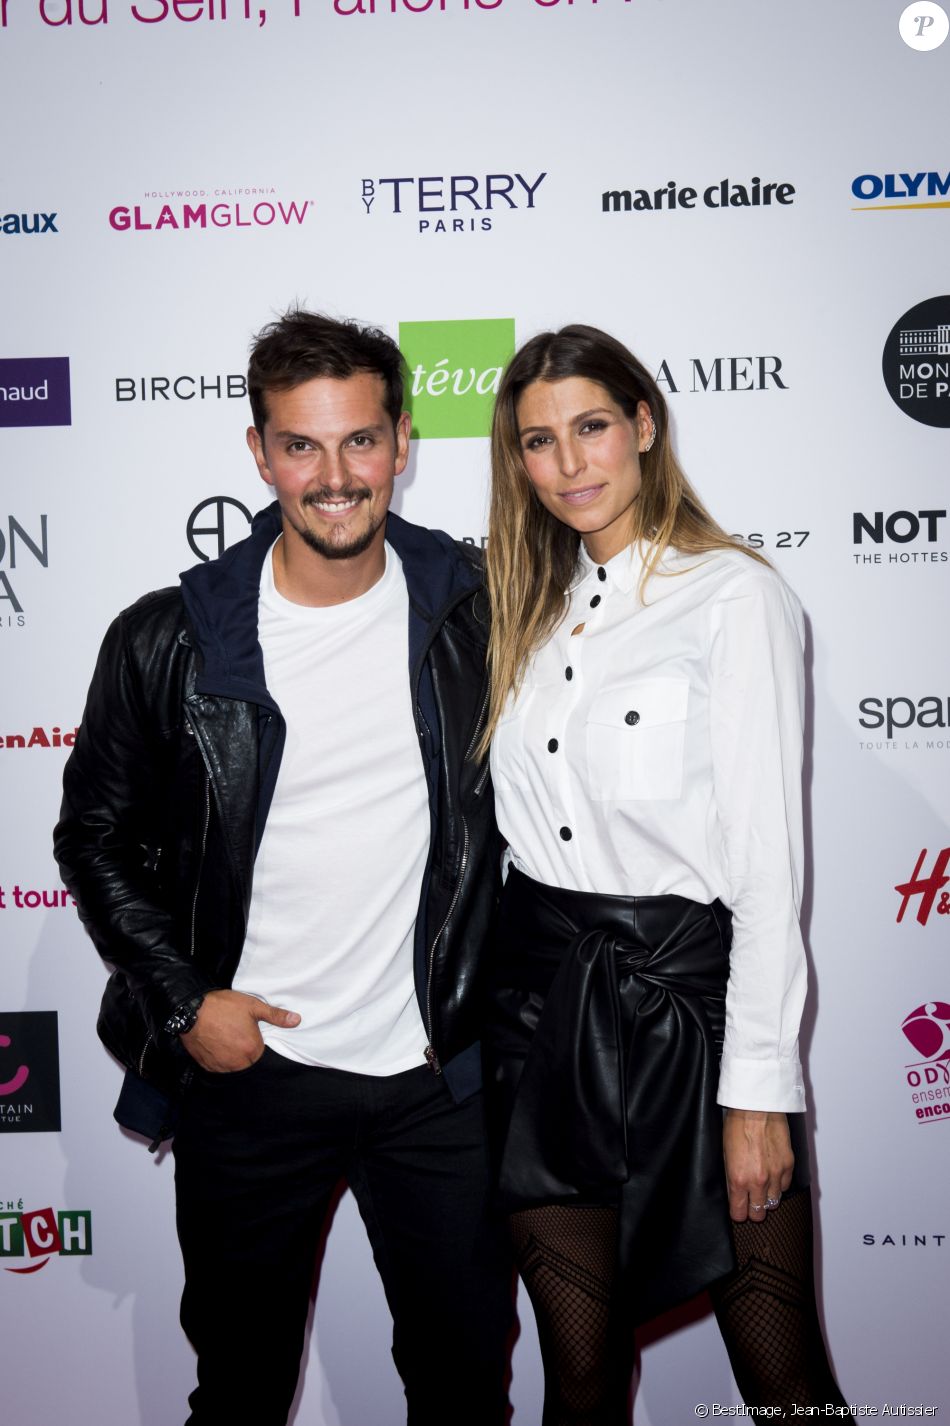 https://static1.purepeople.com/articles/1/36/46/01/@/5253893-laury-thilleman-miss-france-2011-et-so-950x0-4.jpg